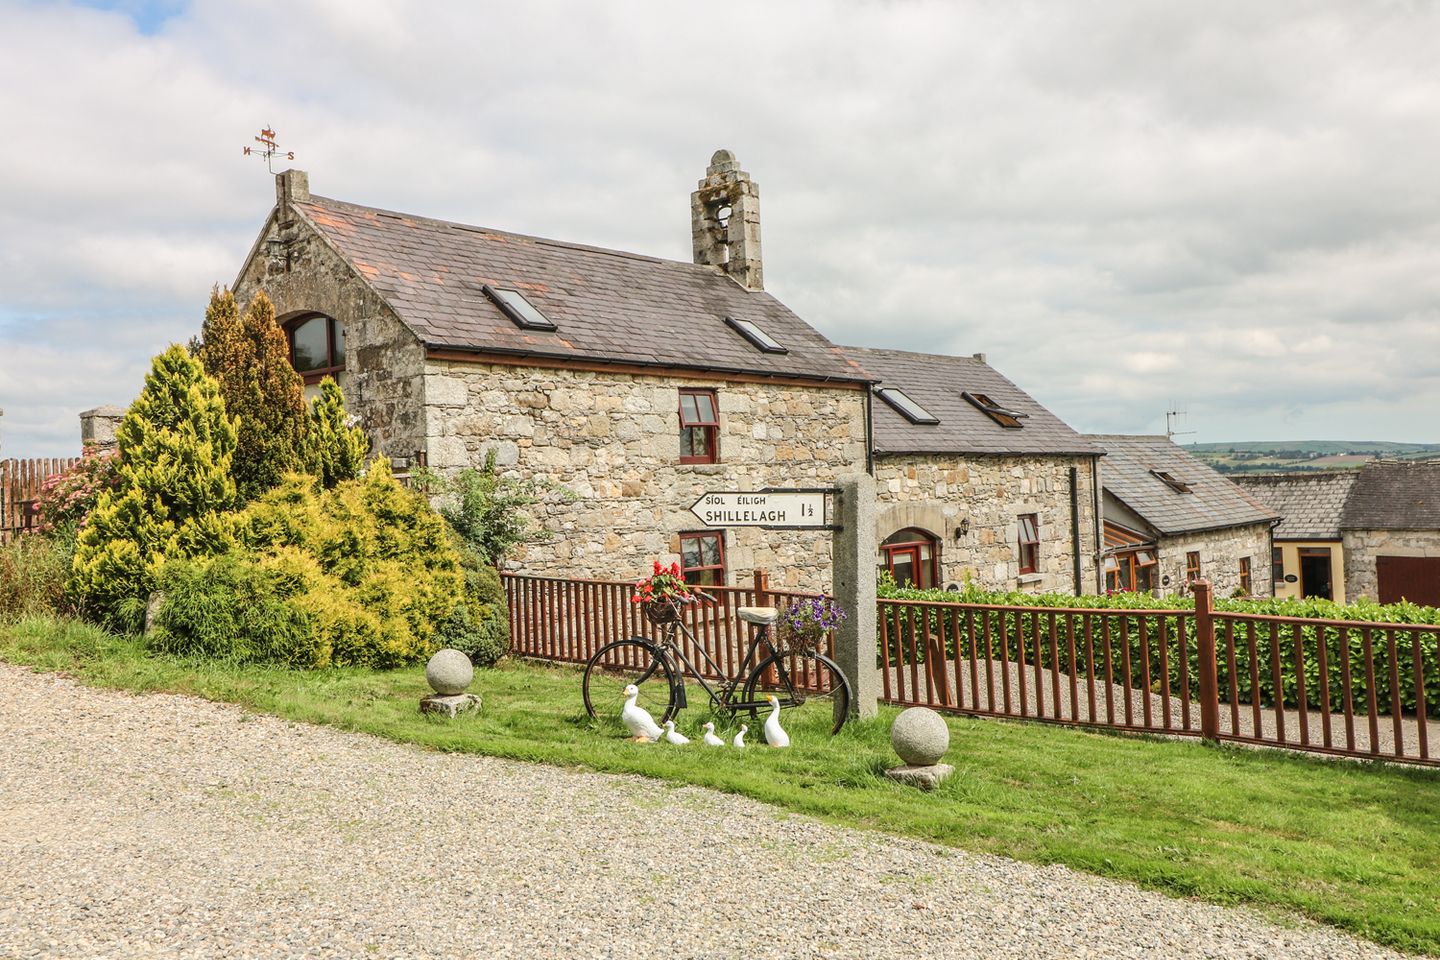 Ref. 988330 The Barn @ Minmore Mews, Minmore Mews, Wicklow Town, Co. Wicklow